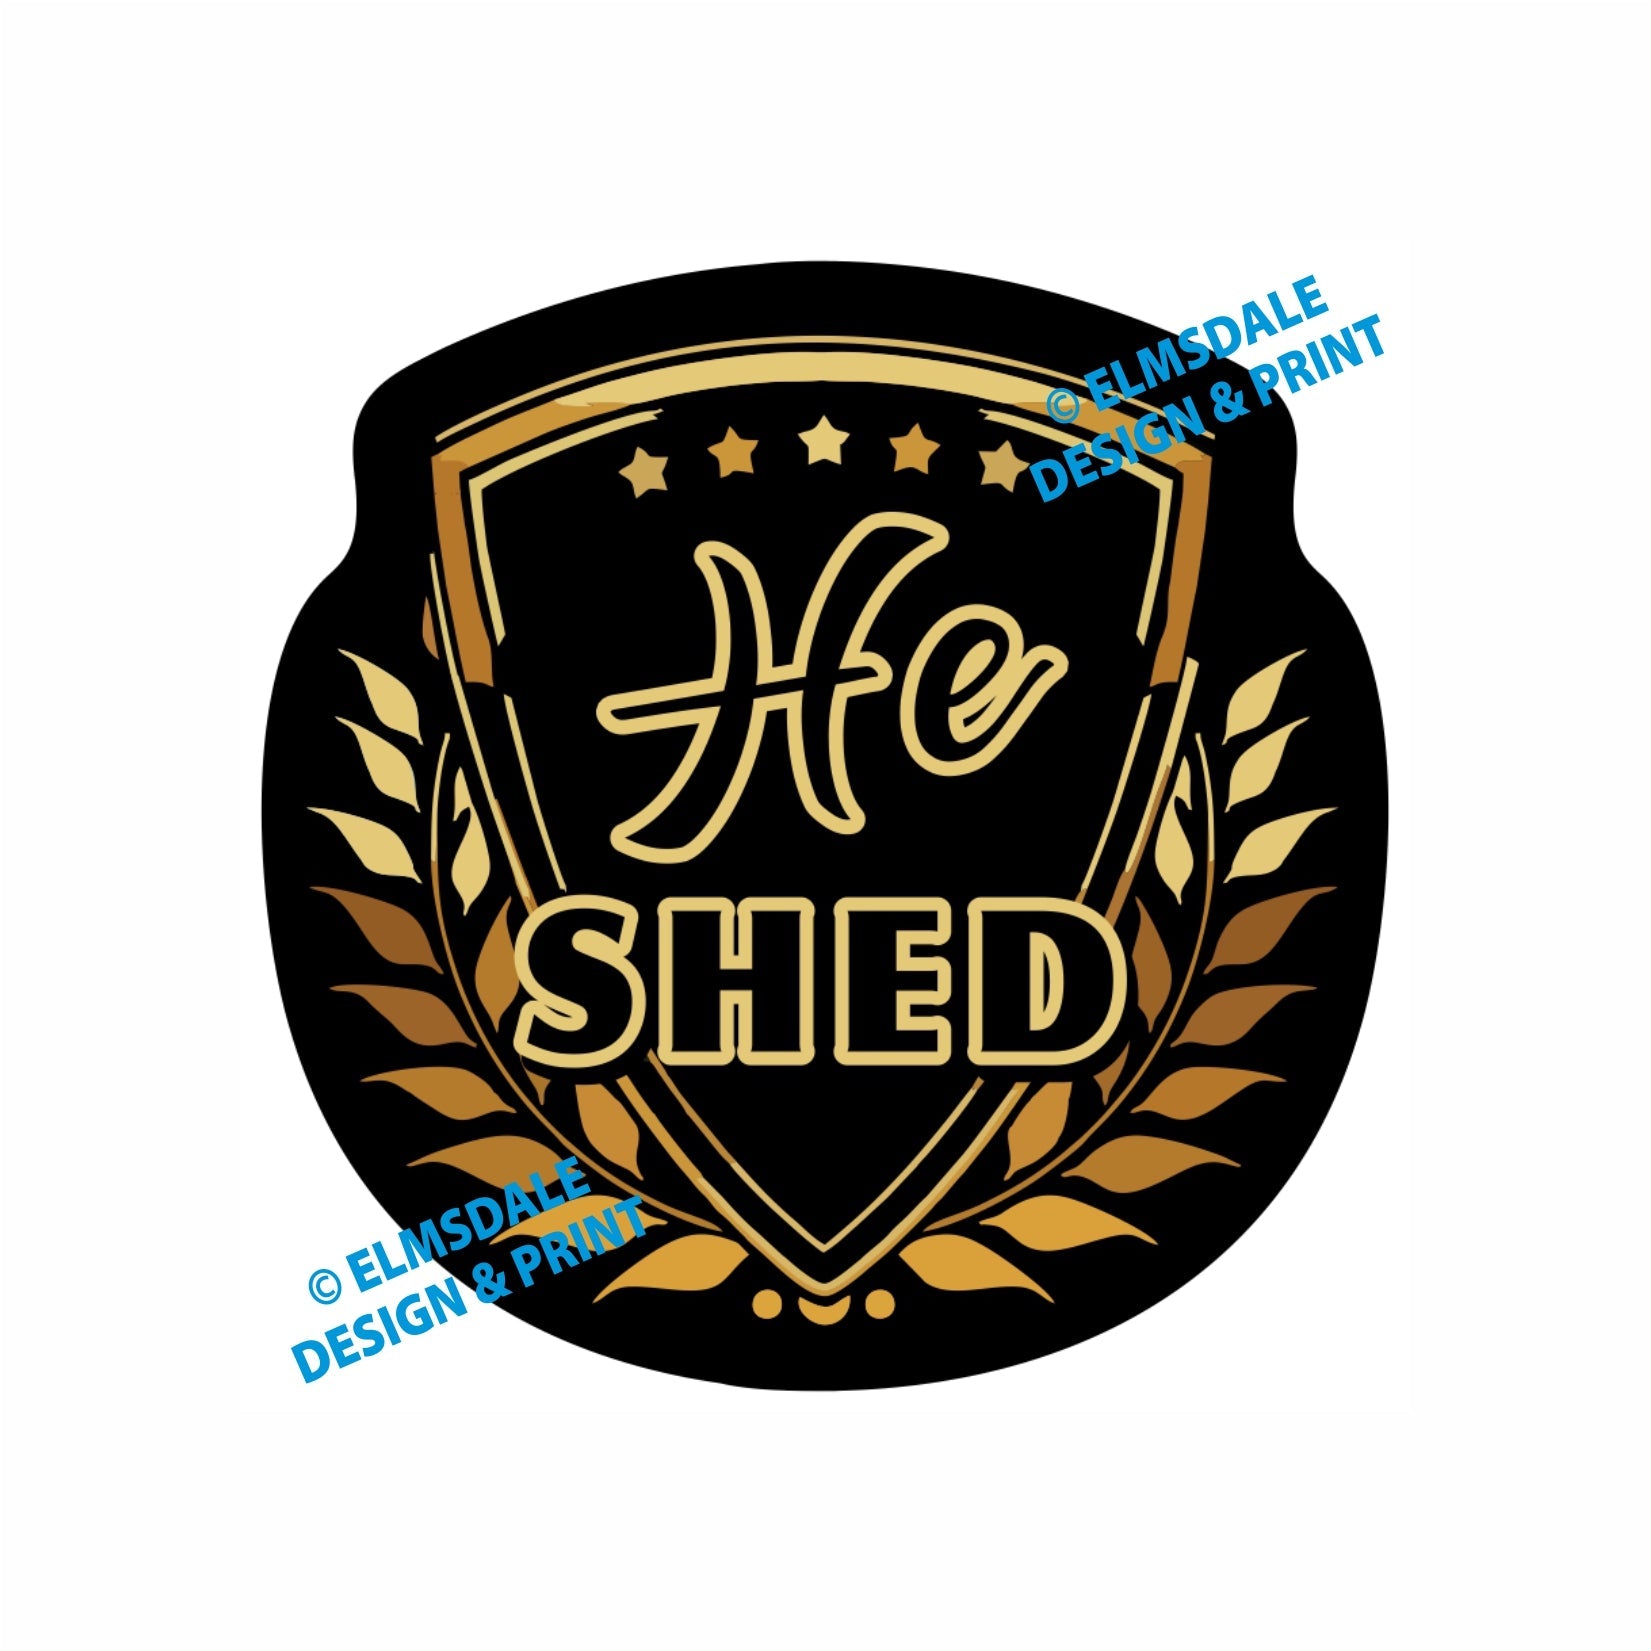 He Shed - Decal / 9.25’ x 9.25’ / Gold & Black